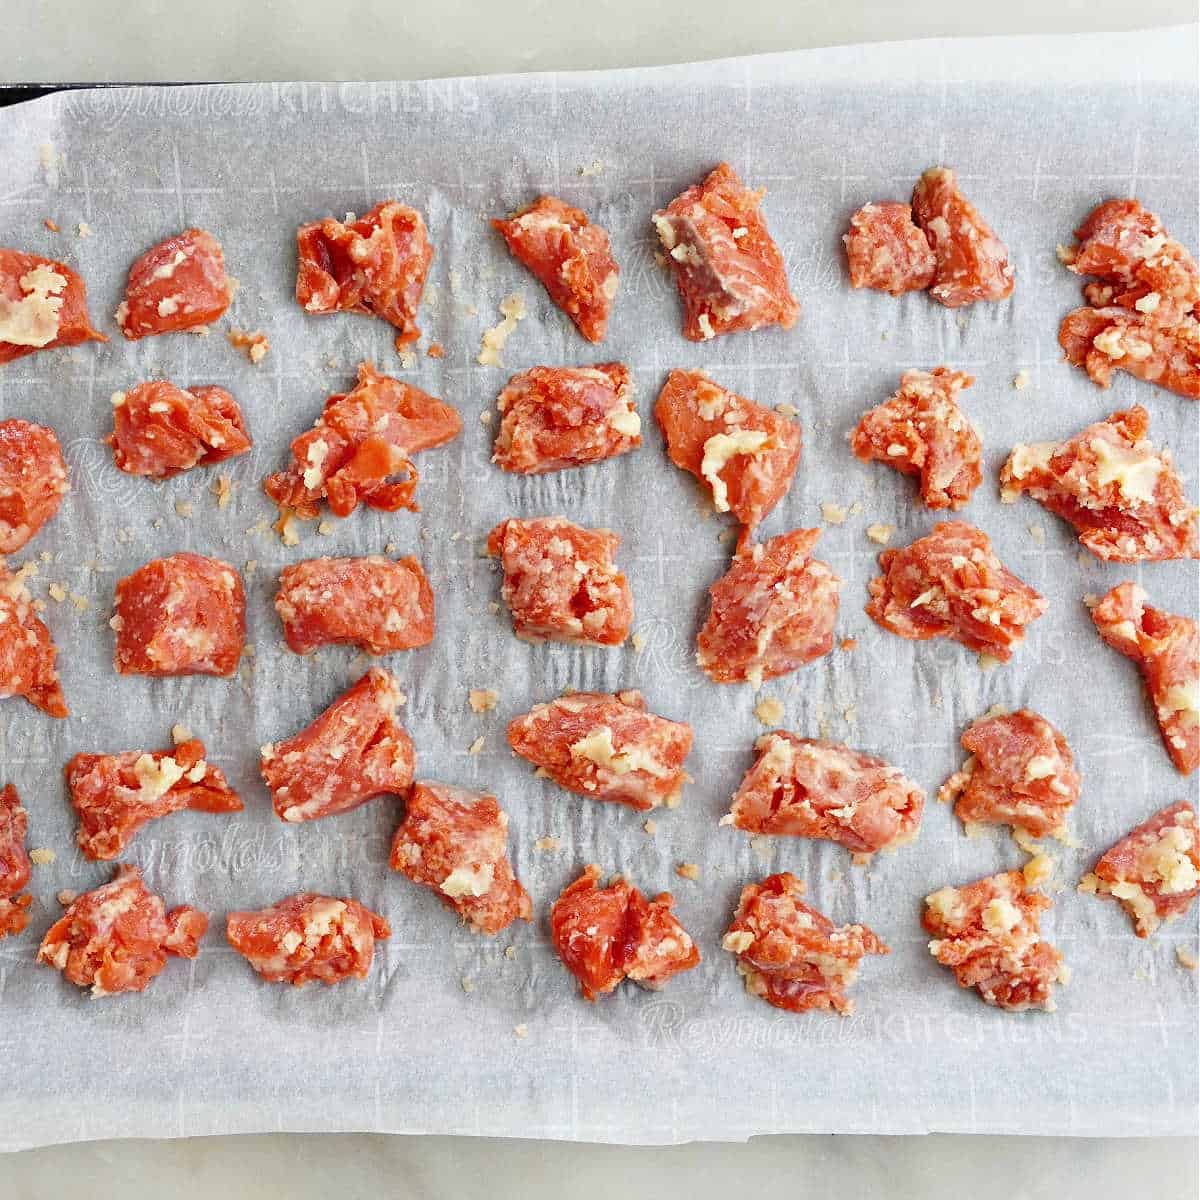 marinated lemon butter salmon bites spread out on a lined baking sheet before going into the oven